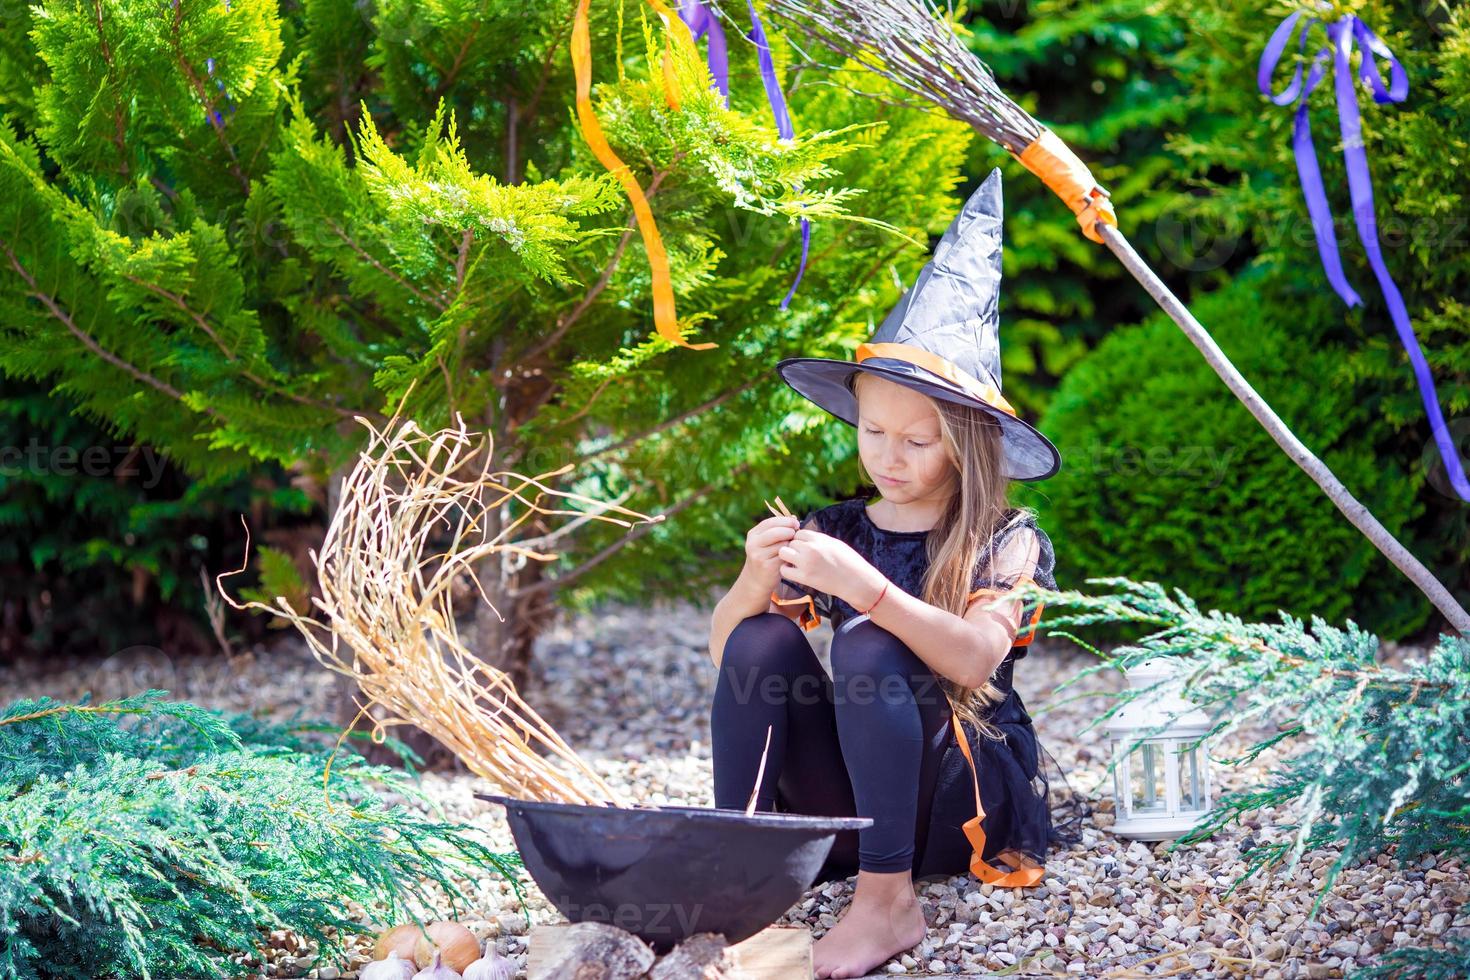 Happy little girl wearing witch costume on Halloween outdoors. Trick or treat. photo